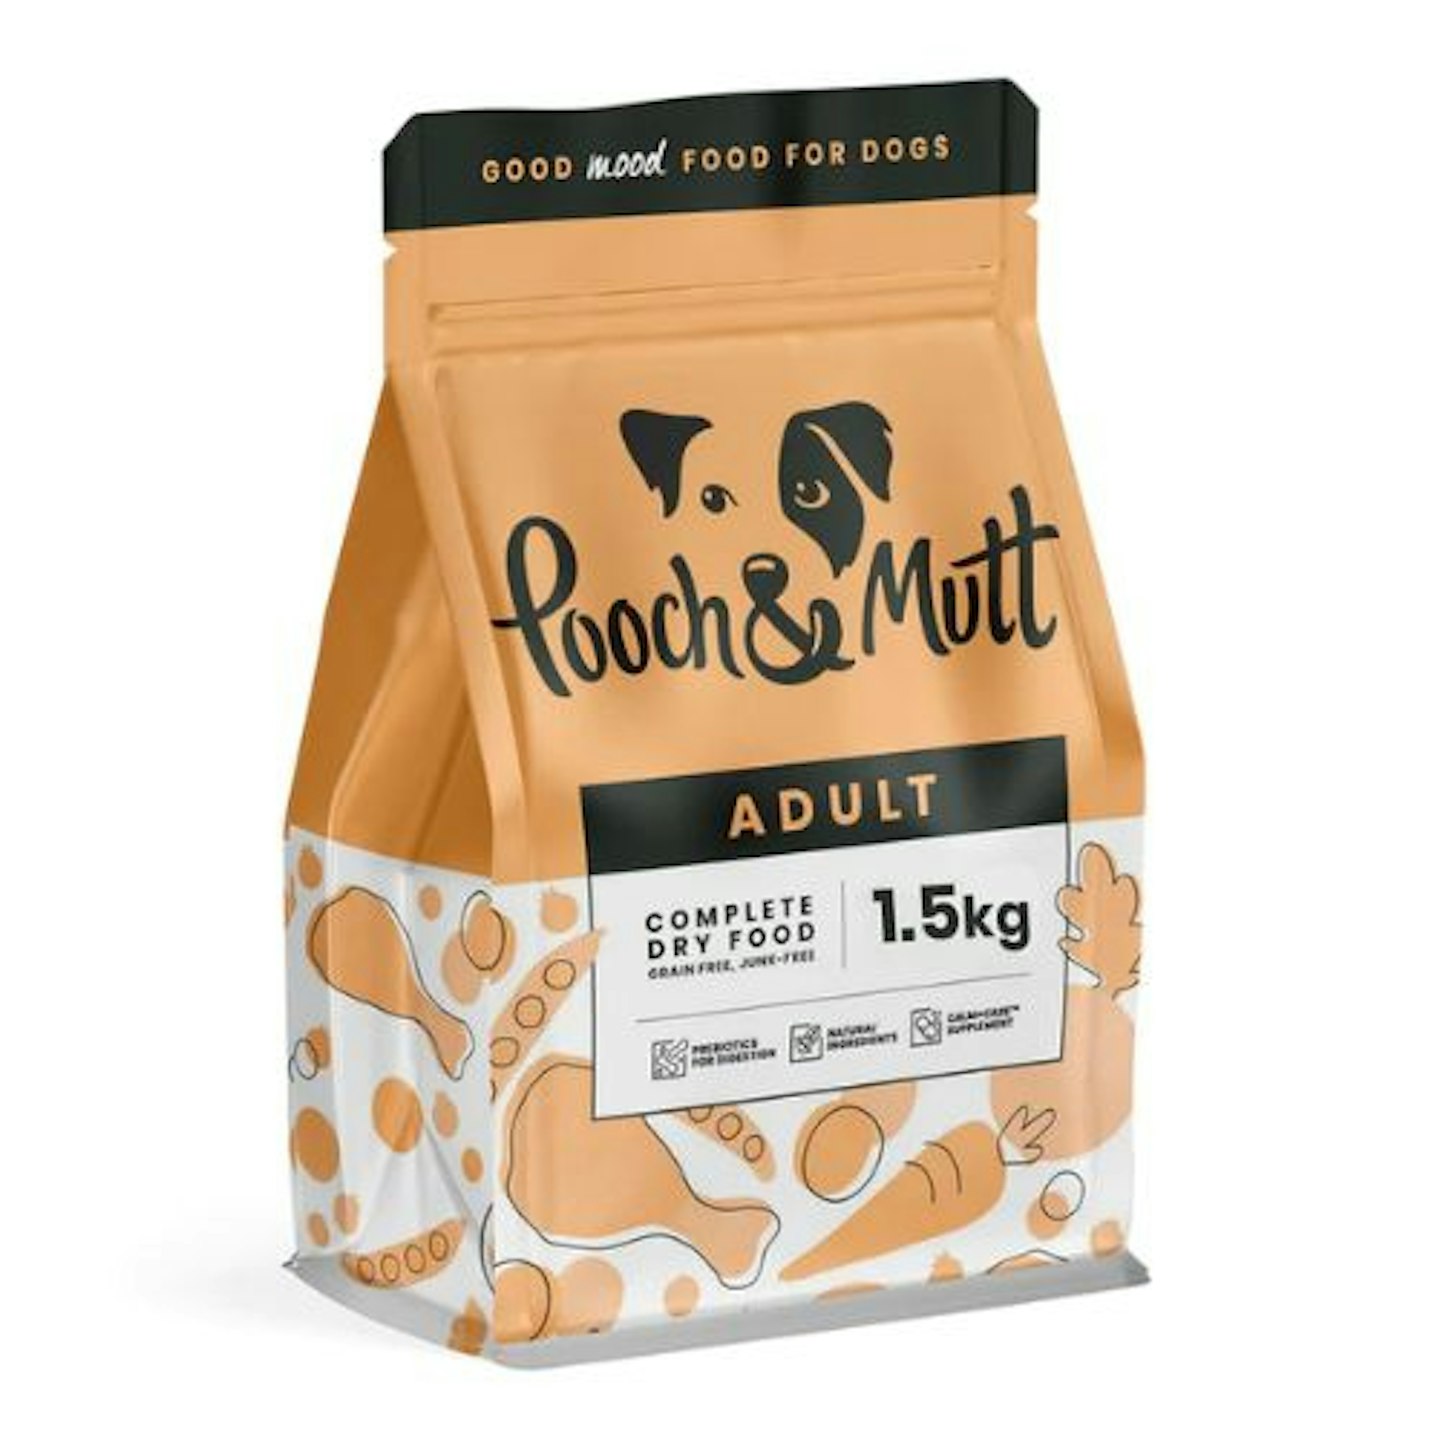 Pooch + Mutt, Adult Complete Superfood - 1.5kg